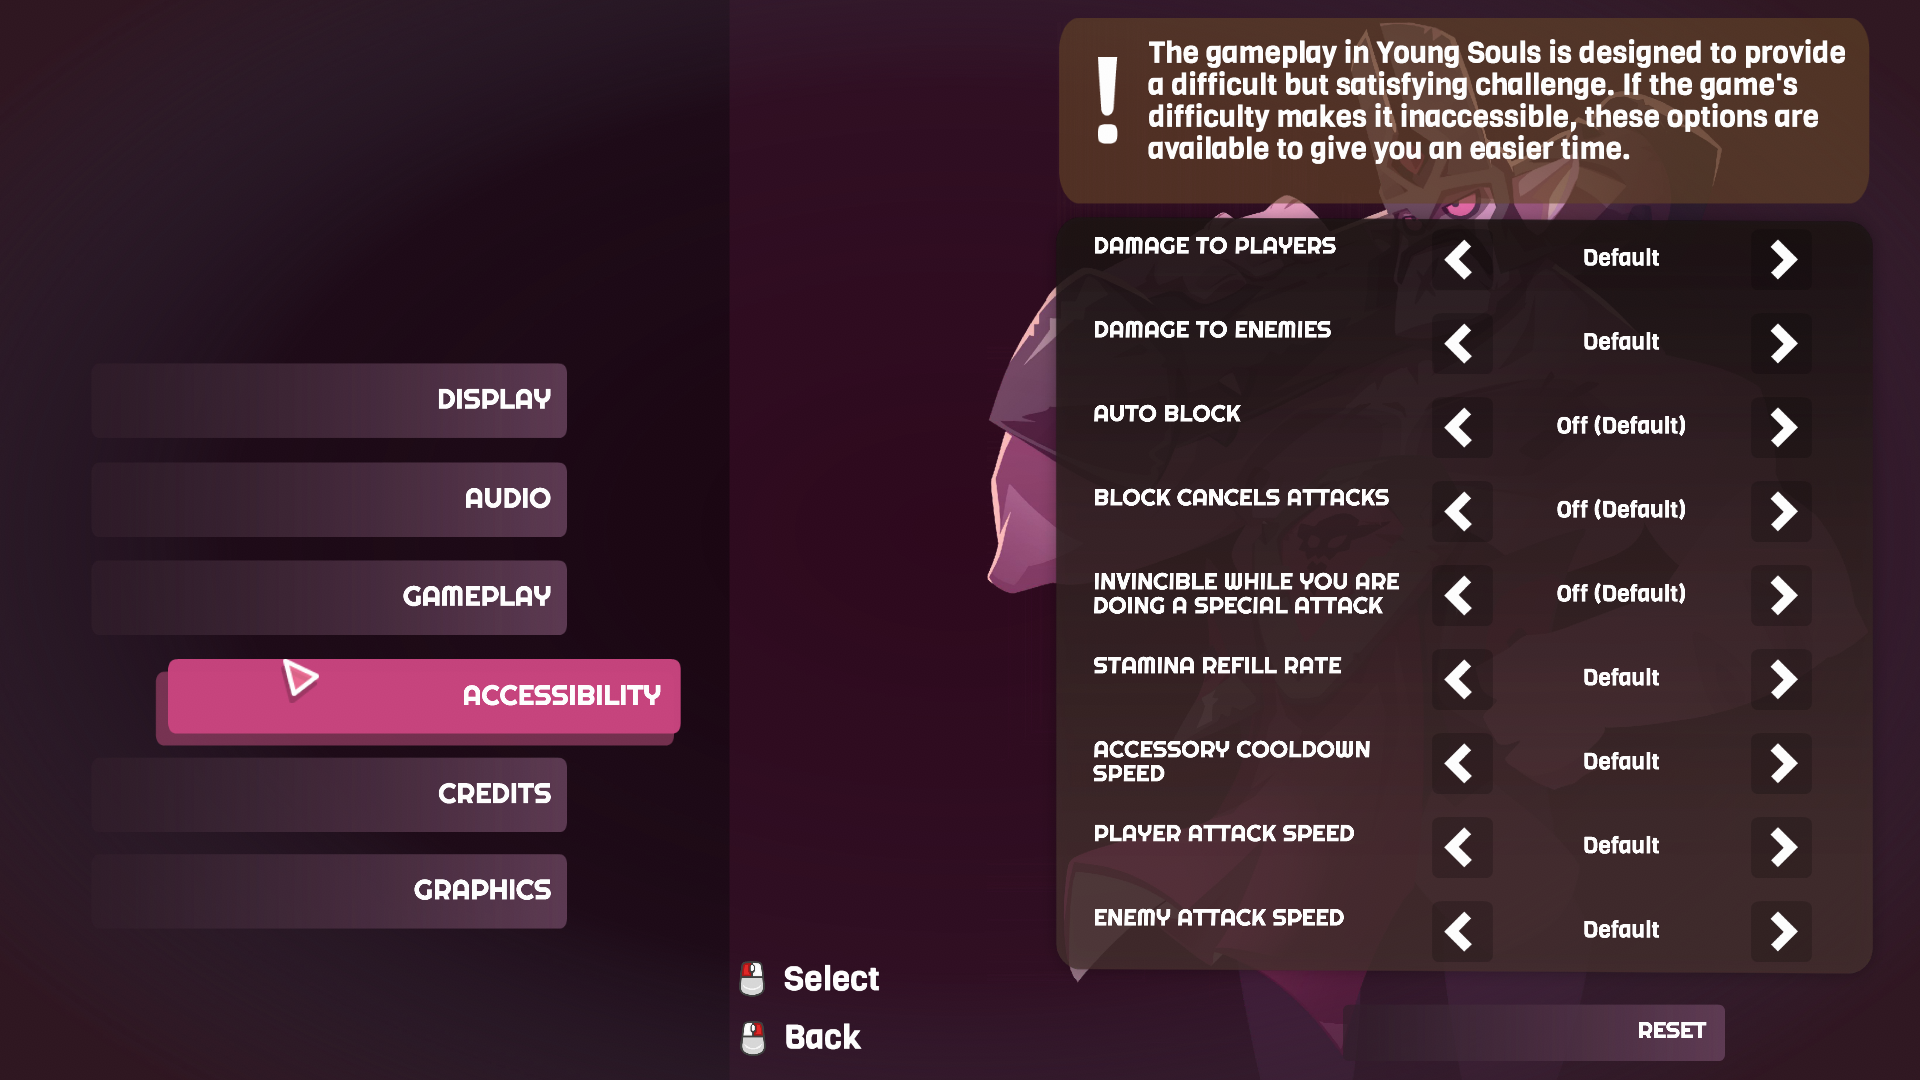 The game's accessability menu, which changes the various facets of gameplay to suit the player's needs